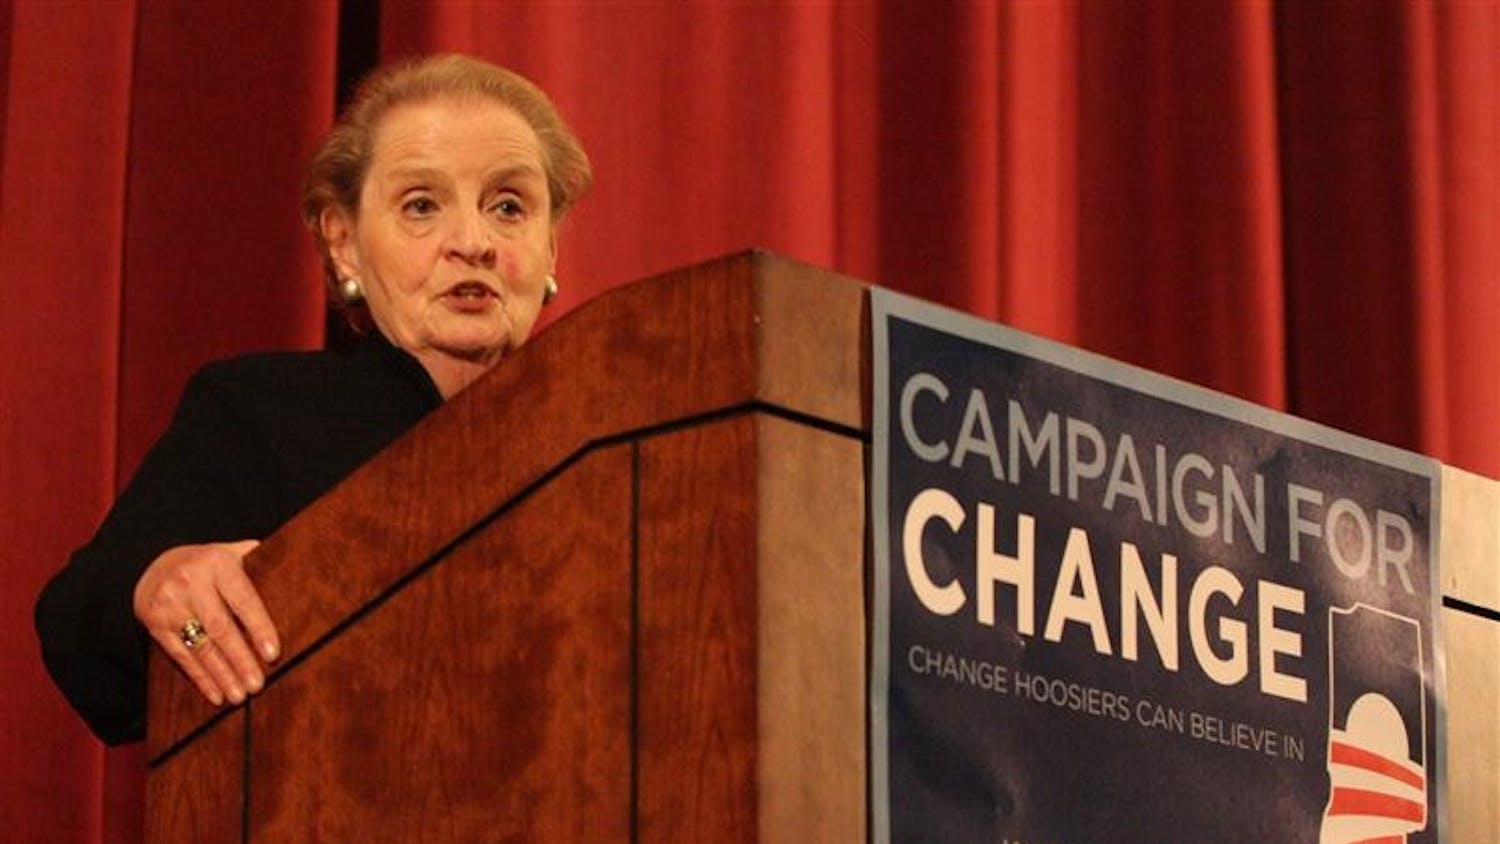 Former Secretary of State Madeleine Albright spoke to a packed room at the Indiana Memorial Union's Alumni Hall Friday afternoon. Albright spoke briefly about the importance of foreign policy and then answered questions from audience members.